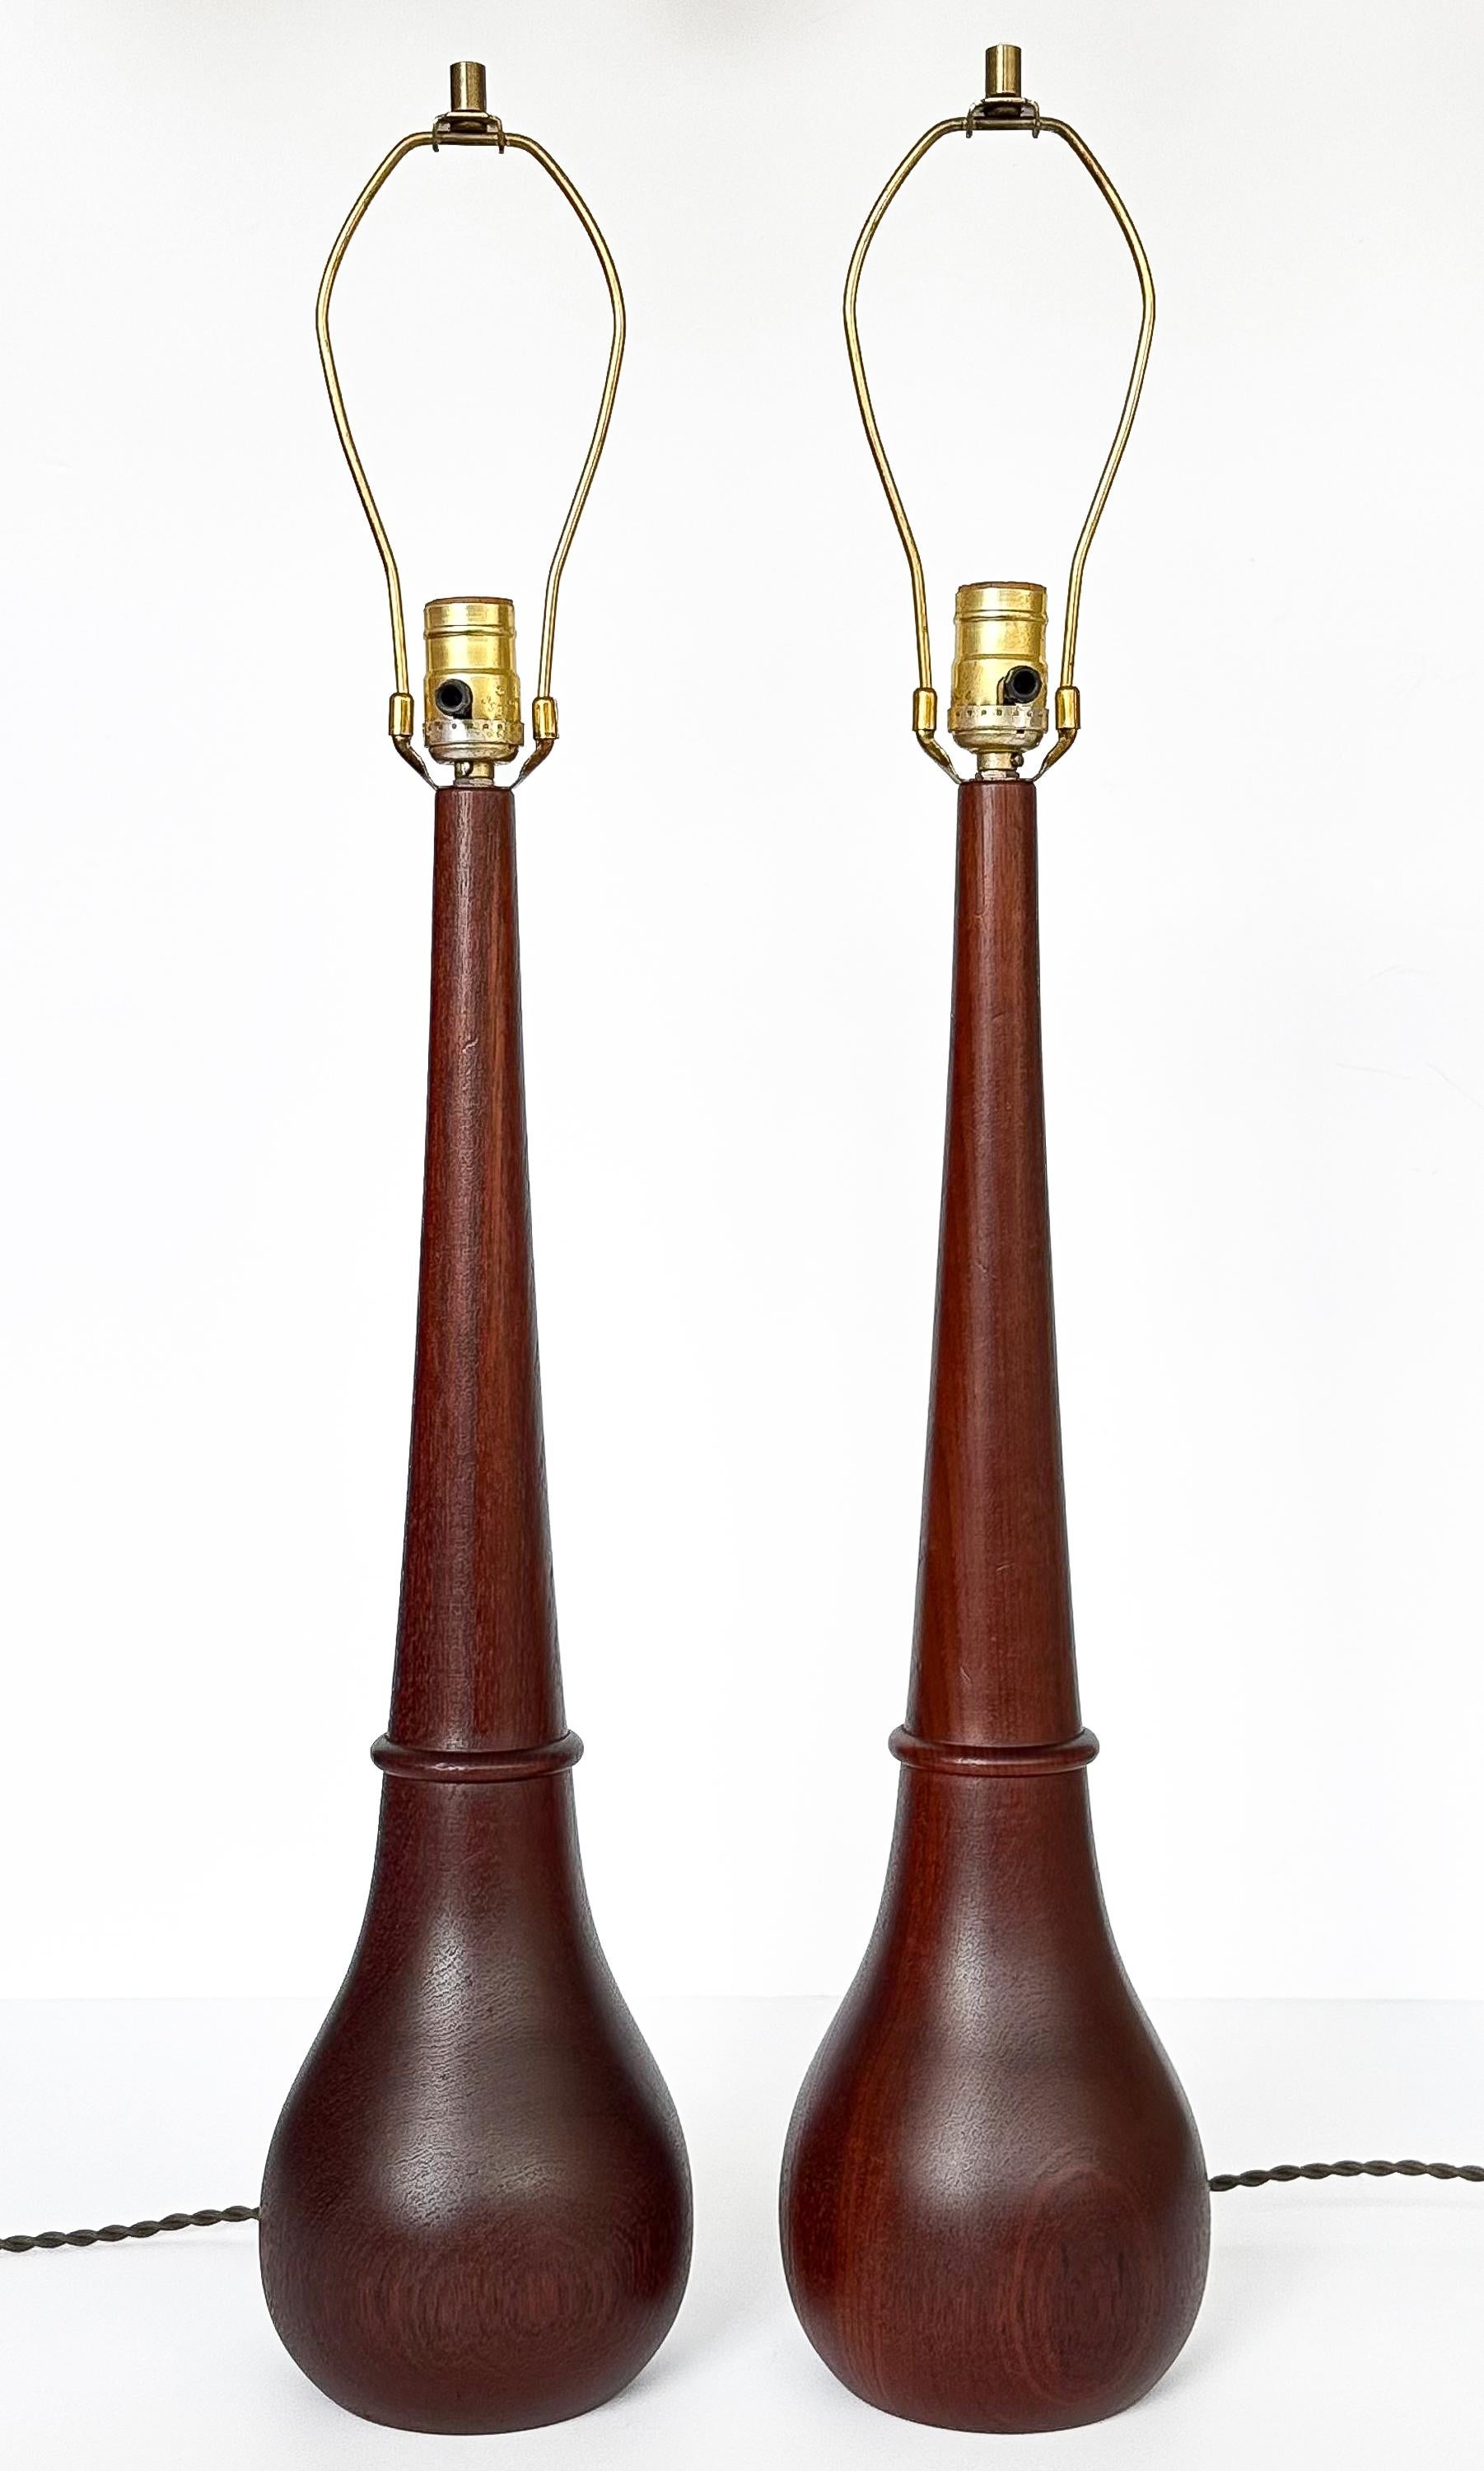 A splendid pair of uncommon sculptural Danish solid teak table lamps, Denmark circa 1950s. Each lamp, with its bulbous bottle-form, tells a tale of meticulous crafting. The choice of solid teak wood, enriched with a lustrous walnut stain, speaks of